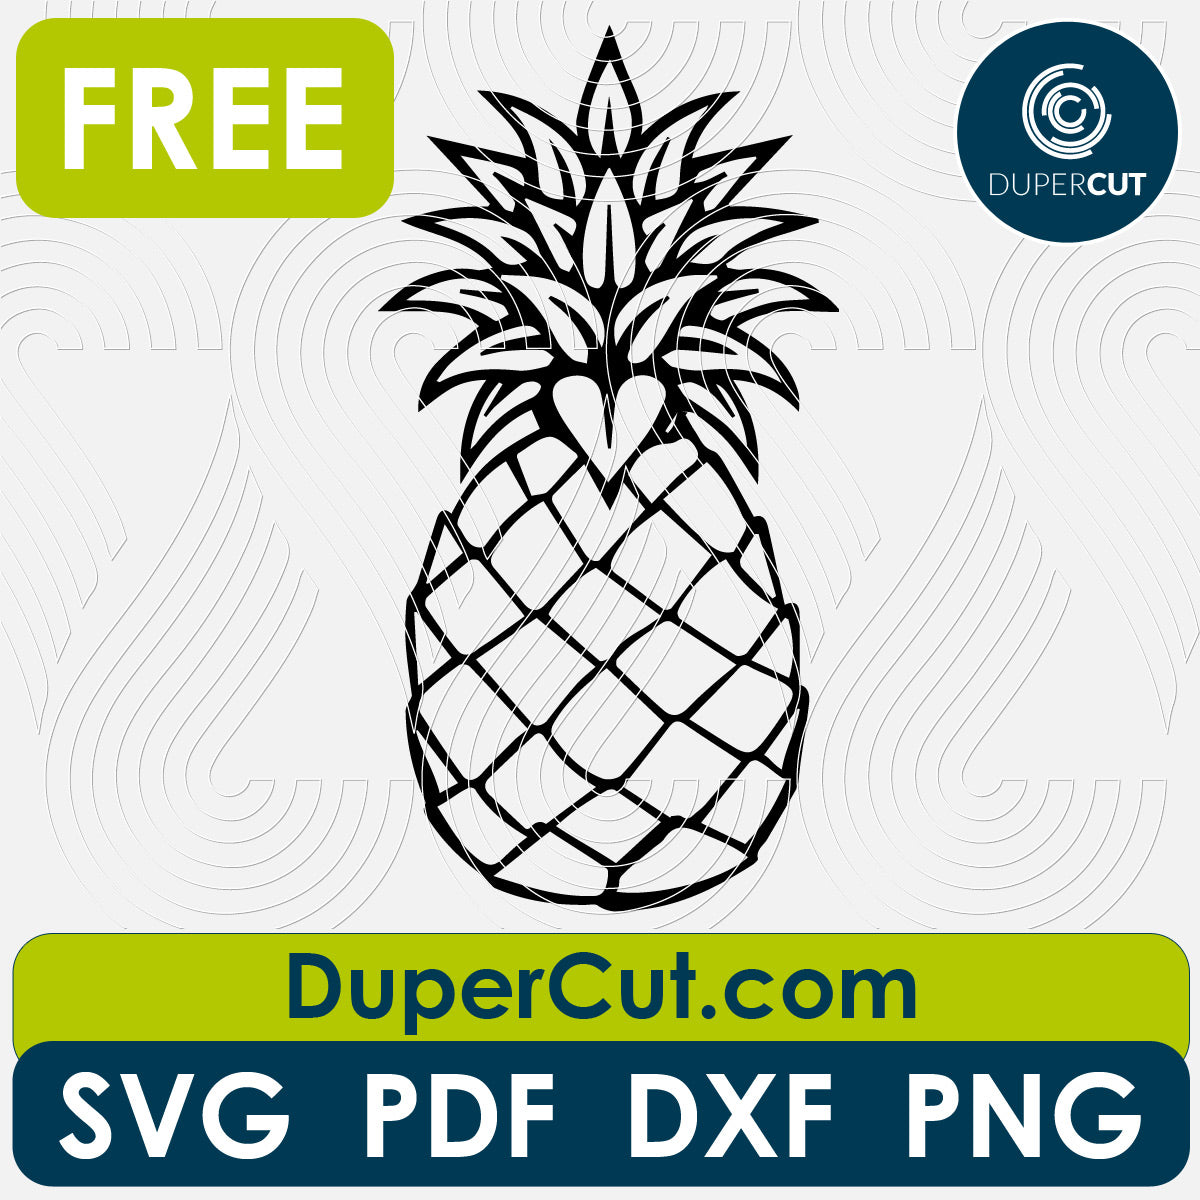 Pinapple - free SVG PNG DXF vector files for laser and blade cutting machines. Glowforge, Cricut, Silhouette cameo templates by DuperCut.com